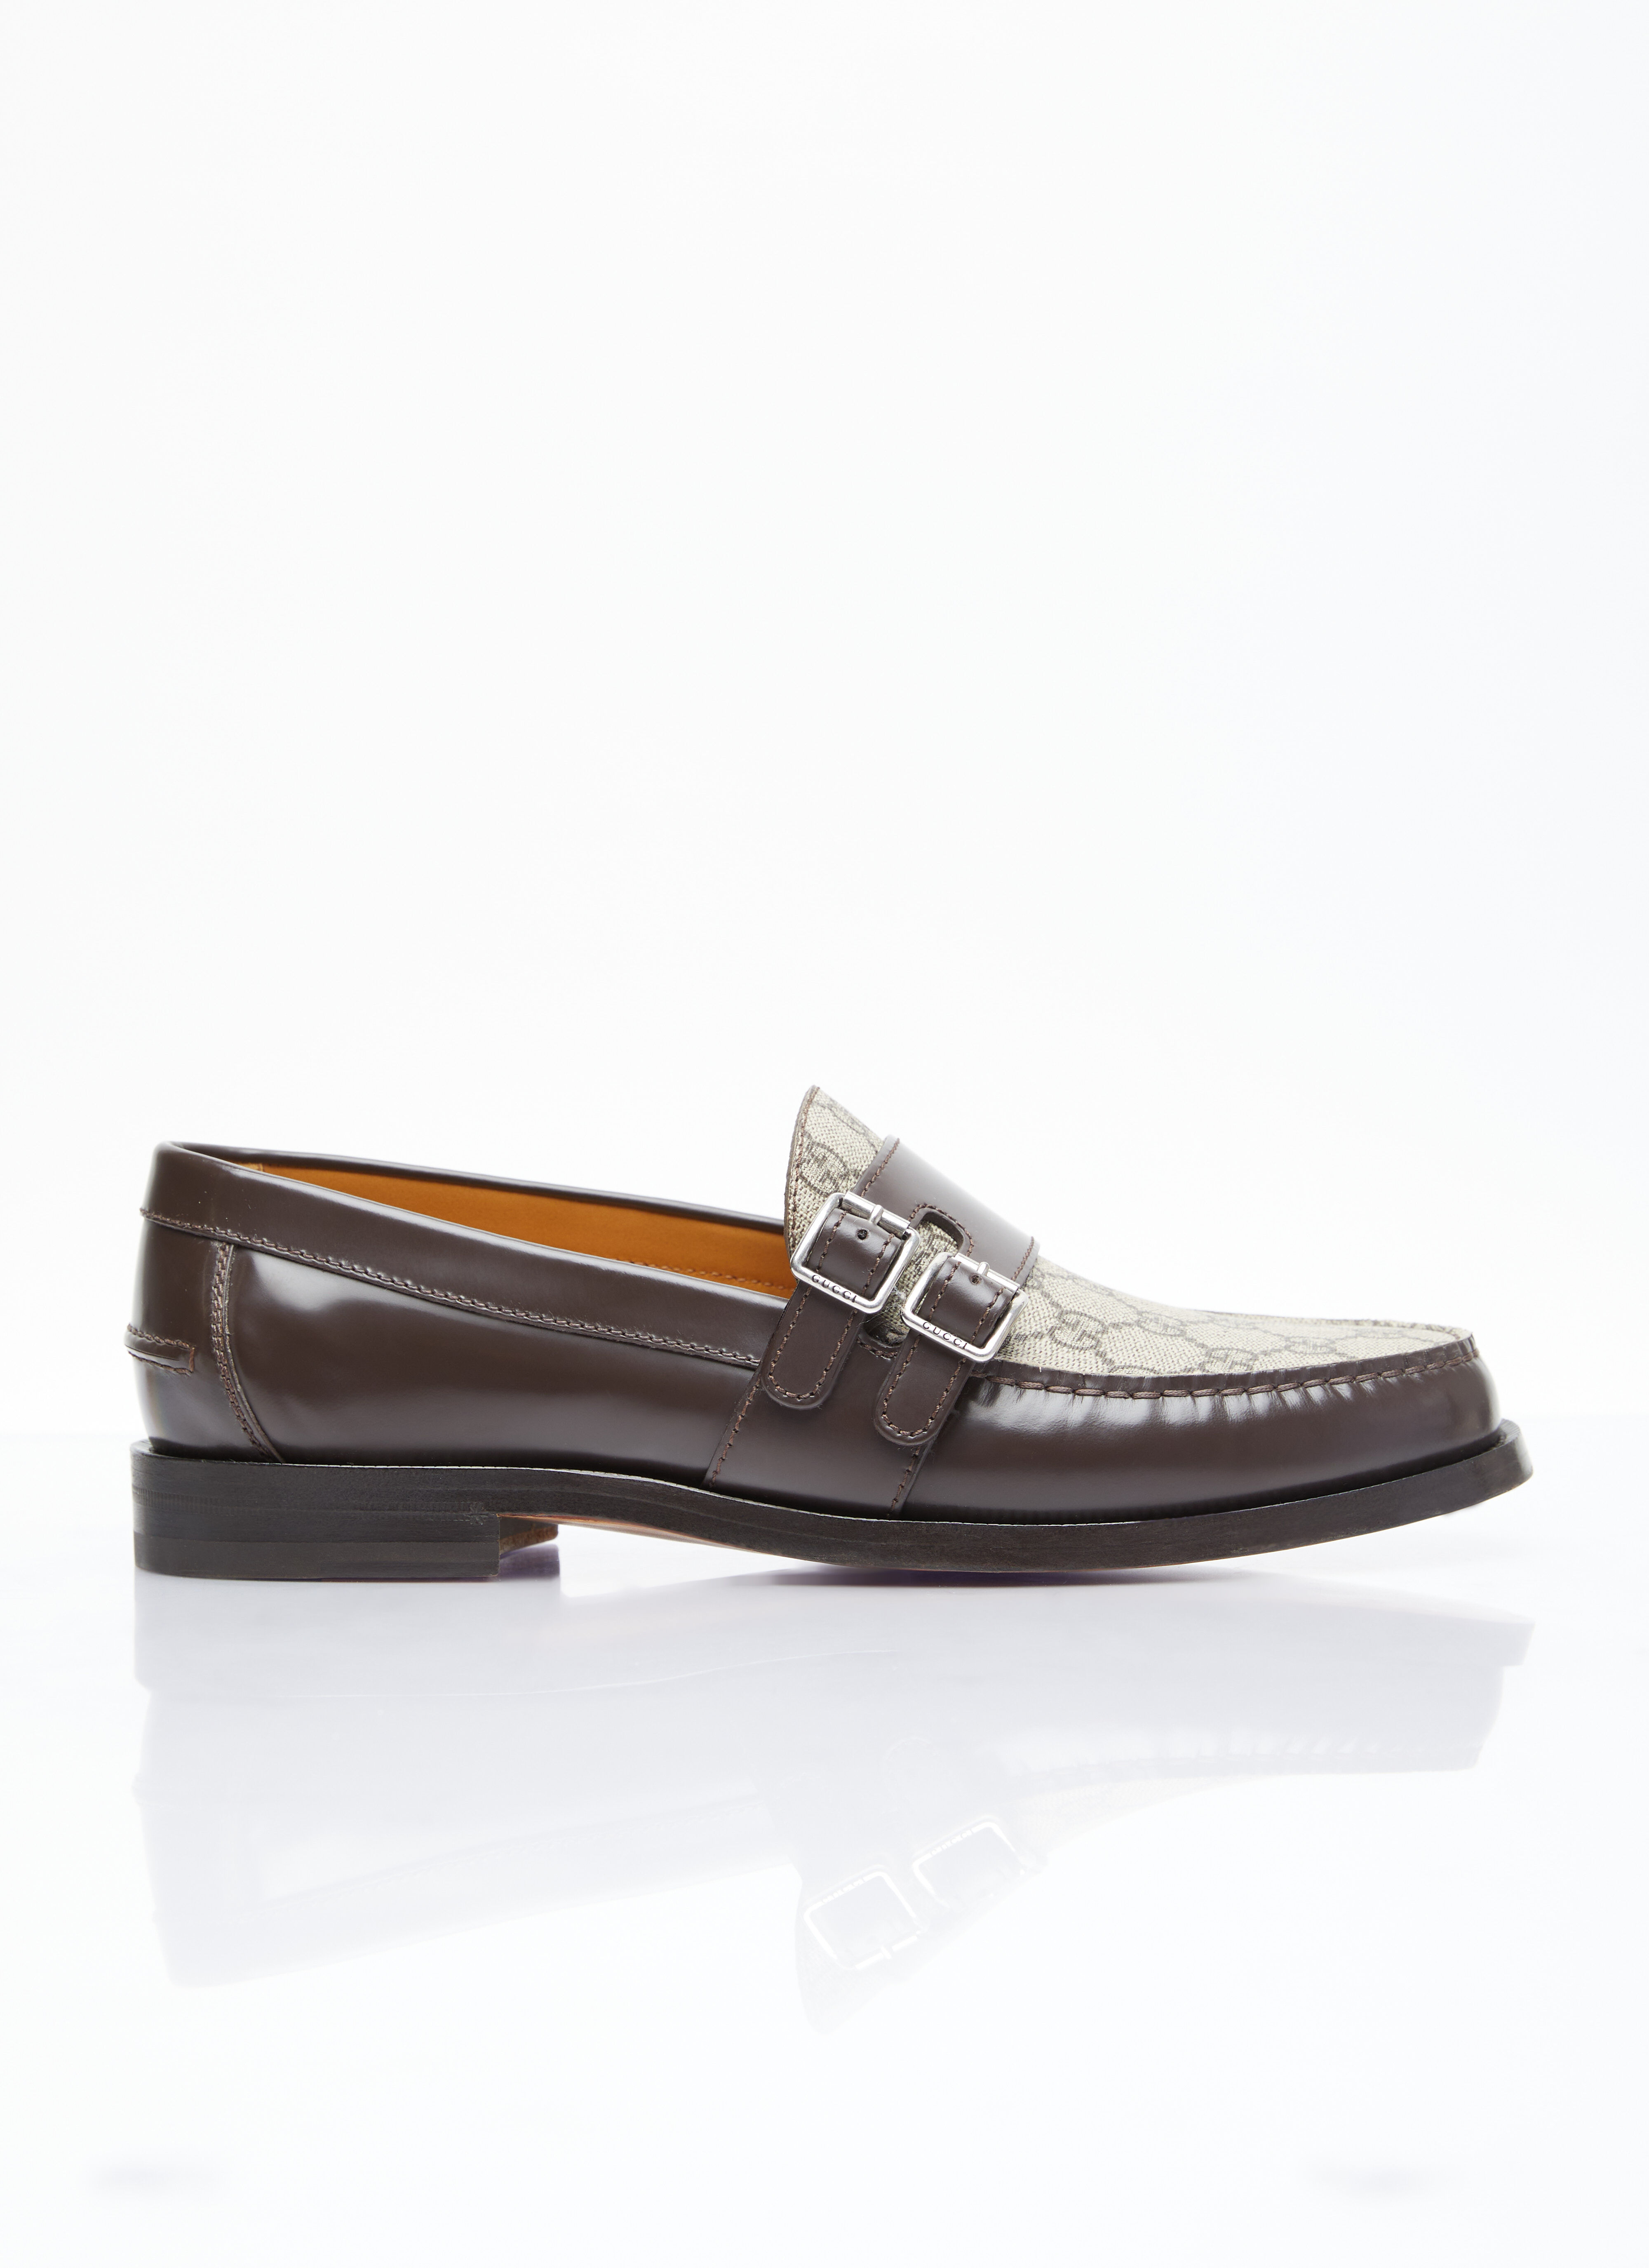 Thom Browne GG Buckle Loafers Black thb0155012